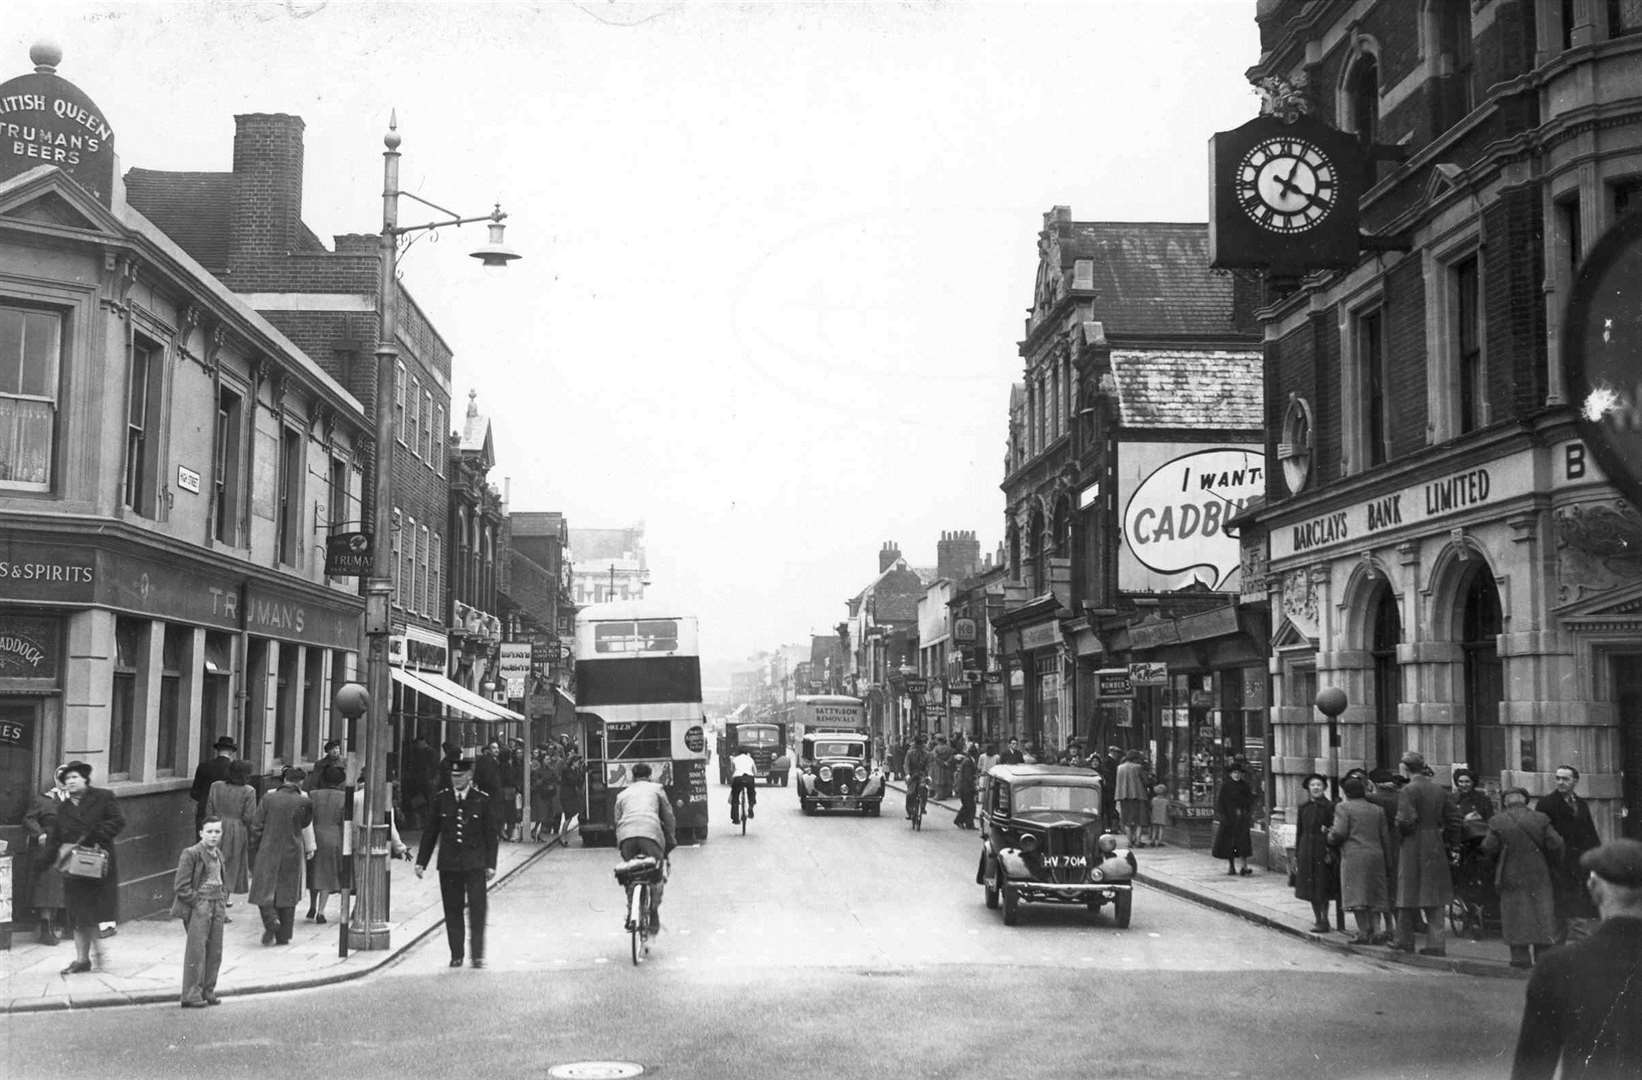 Gillingham High Street in 1951. The British Queen pub on the left is now home to a Betfred, while the Barclays Bank is now occupied by Dockside Property Services